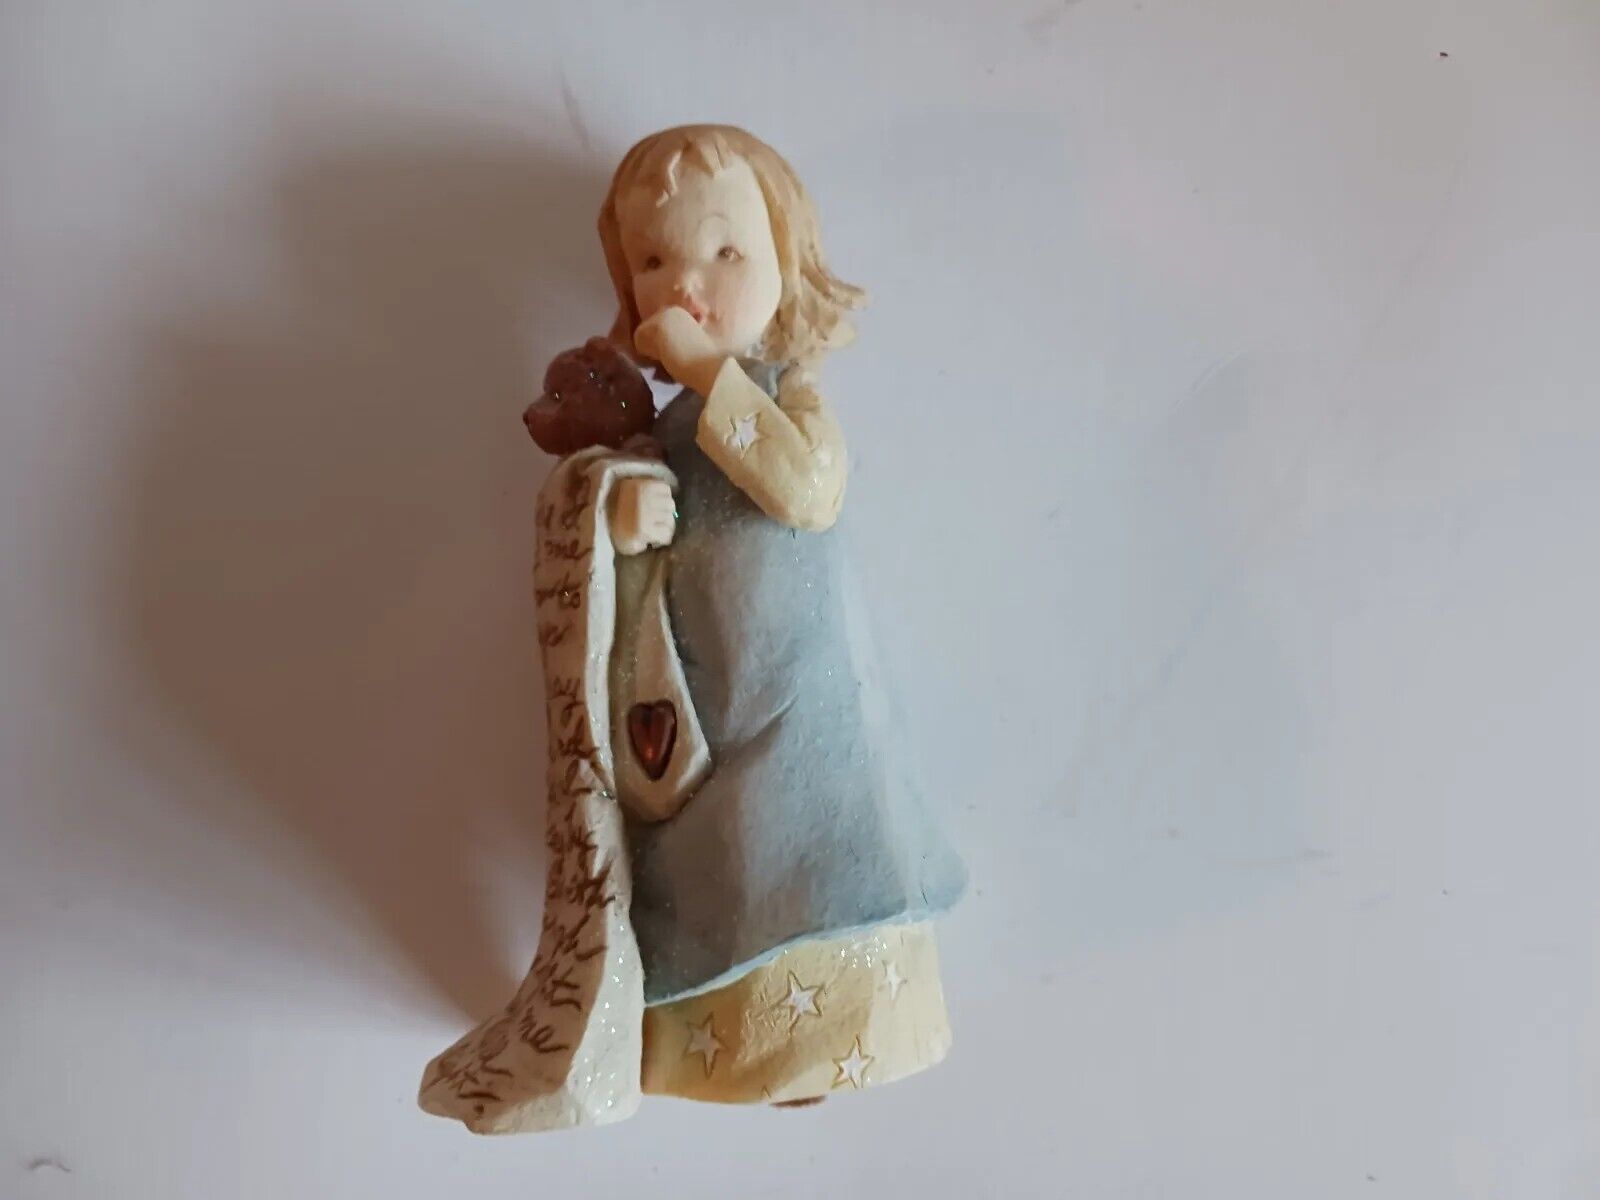 A Childs Gift Foundations Figurine Enesco By Karen Hahn 112028 2003 4 Inches